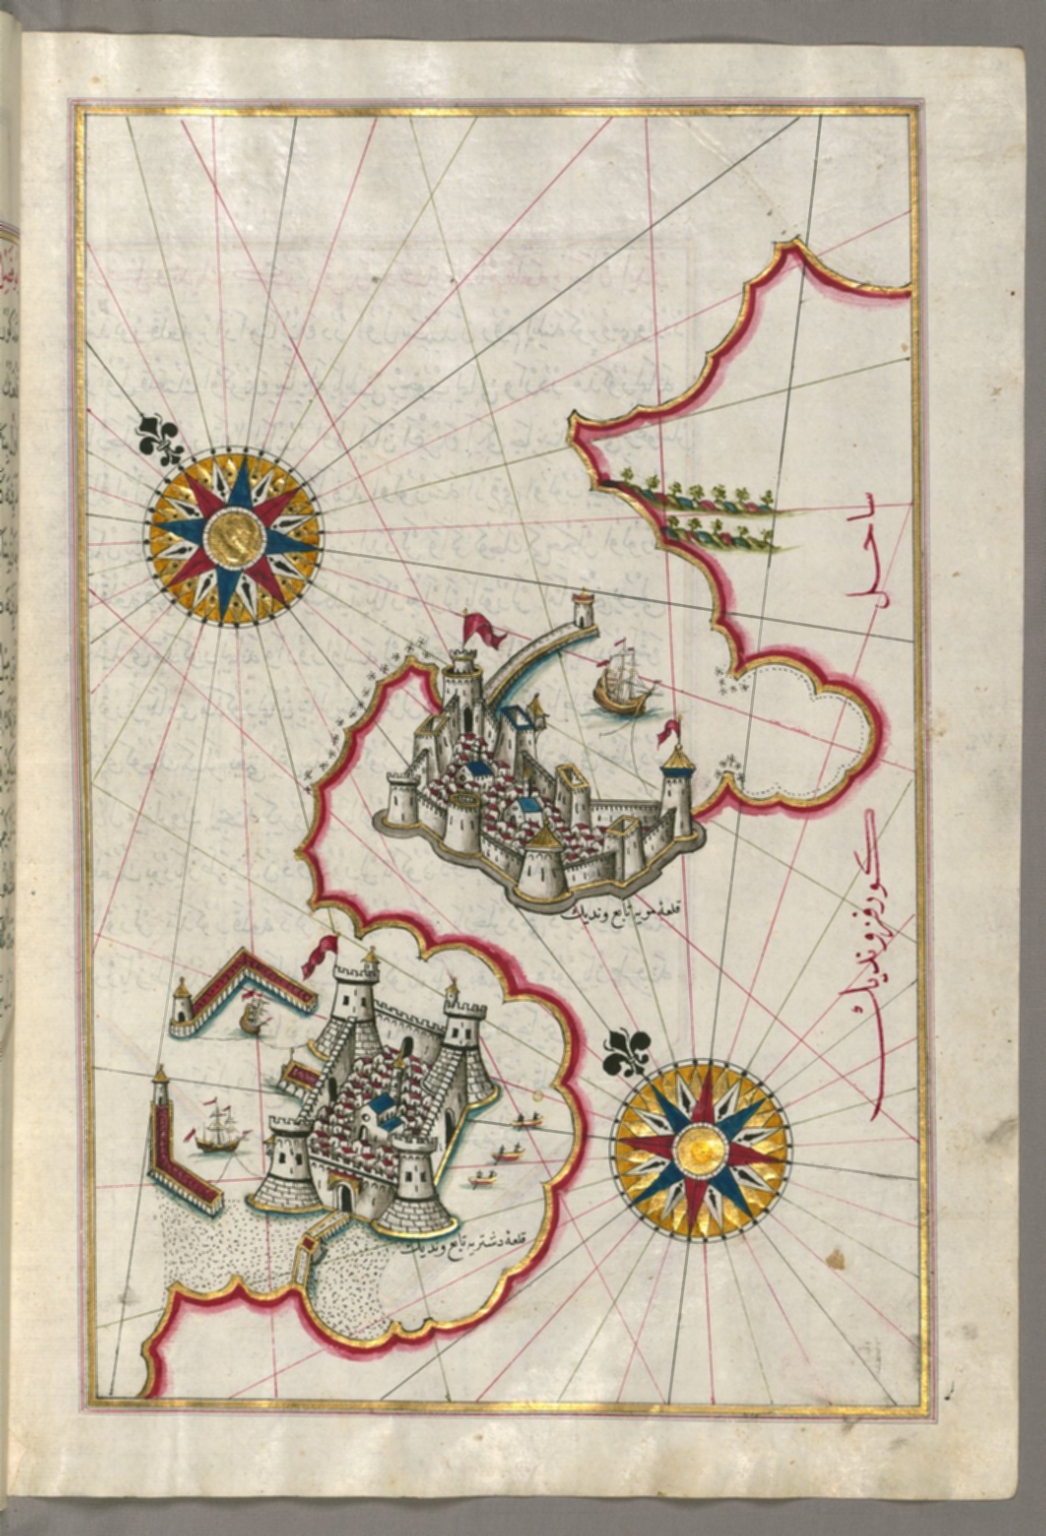 Fol B Coastline Between The Cities Of Koper And Muggia David Rumsey Historical Map Collection